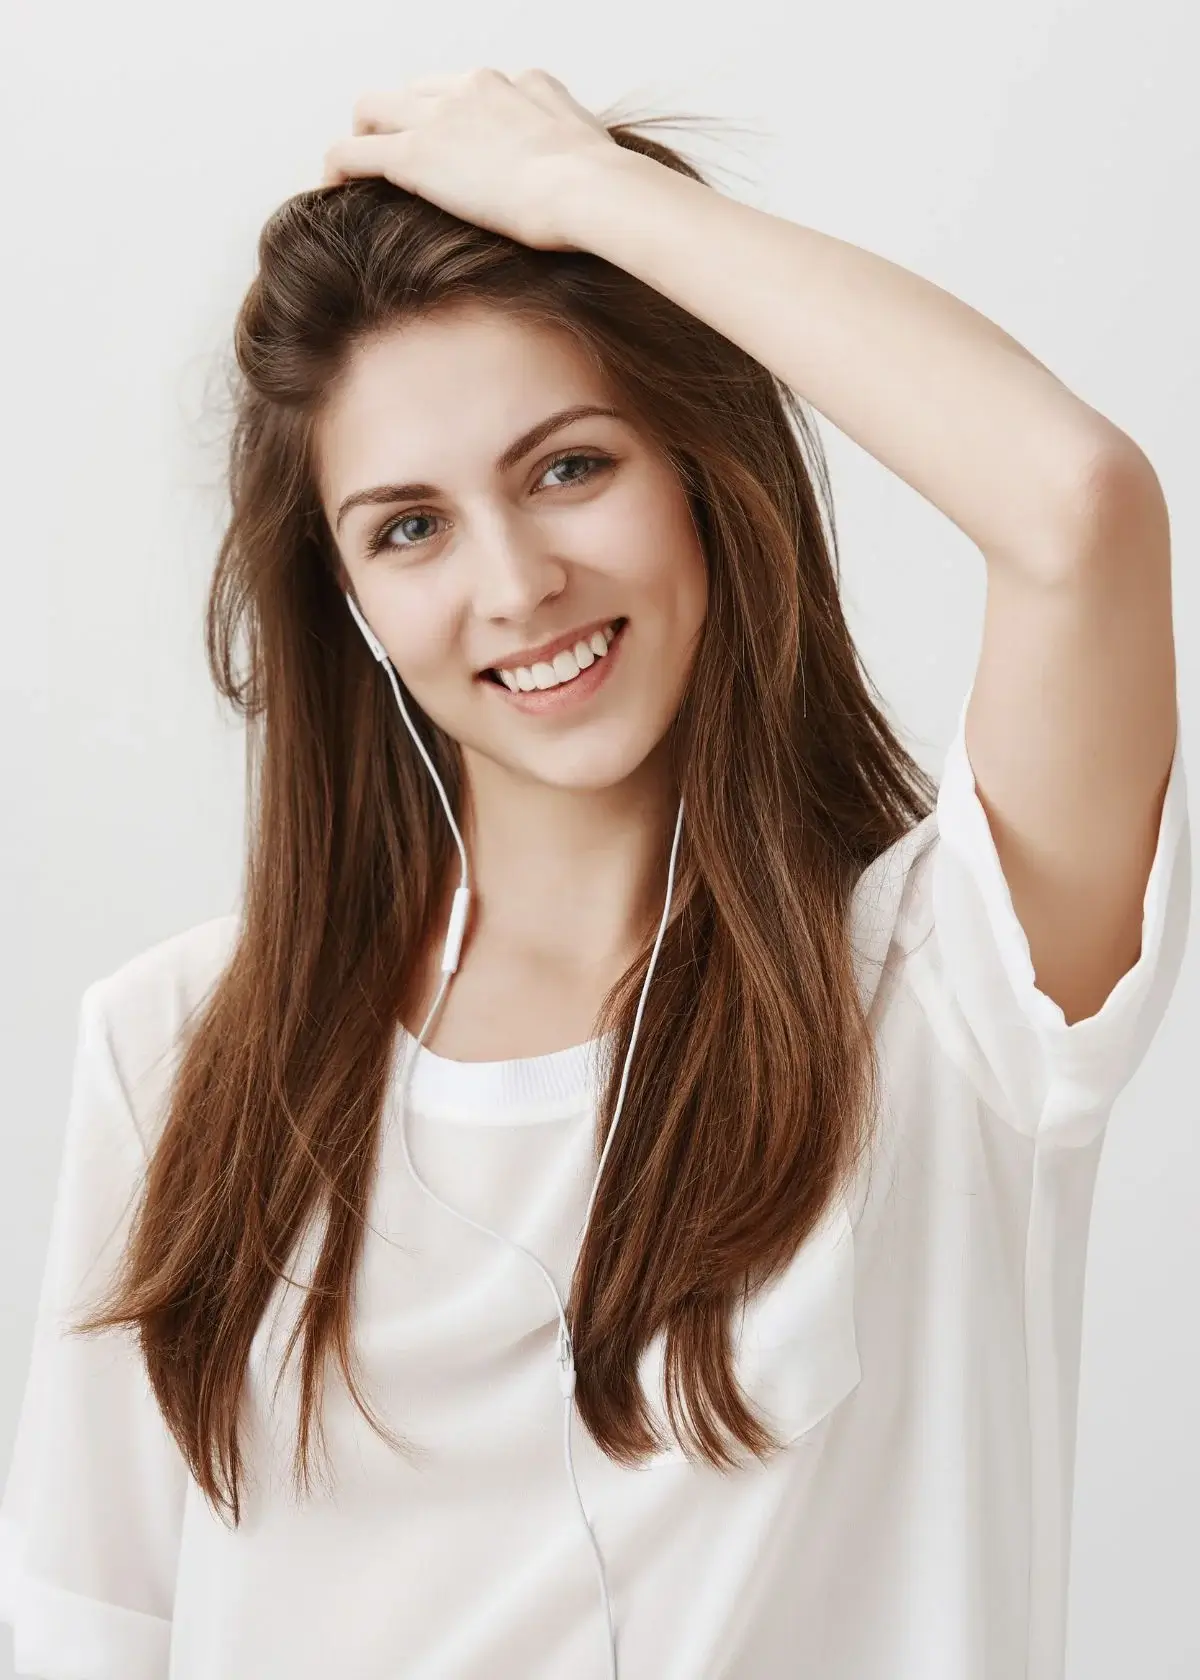 How to choose the right thin hair shampoo and conditioner?